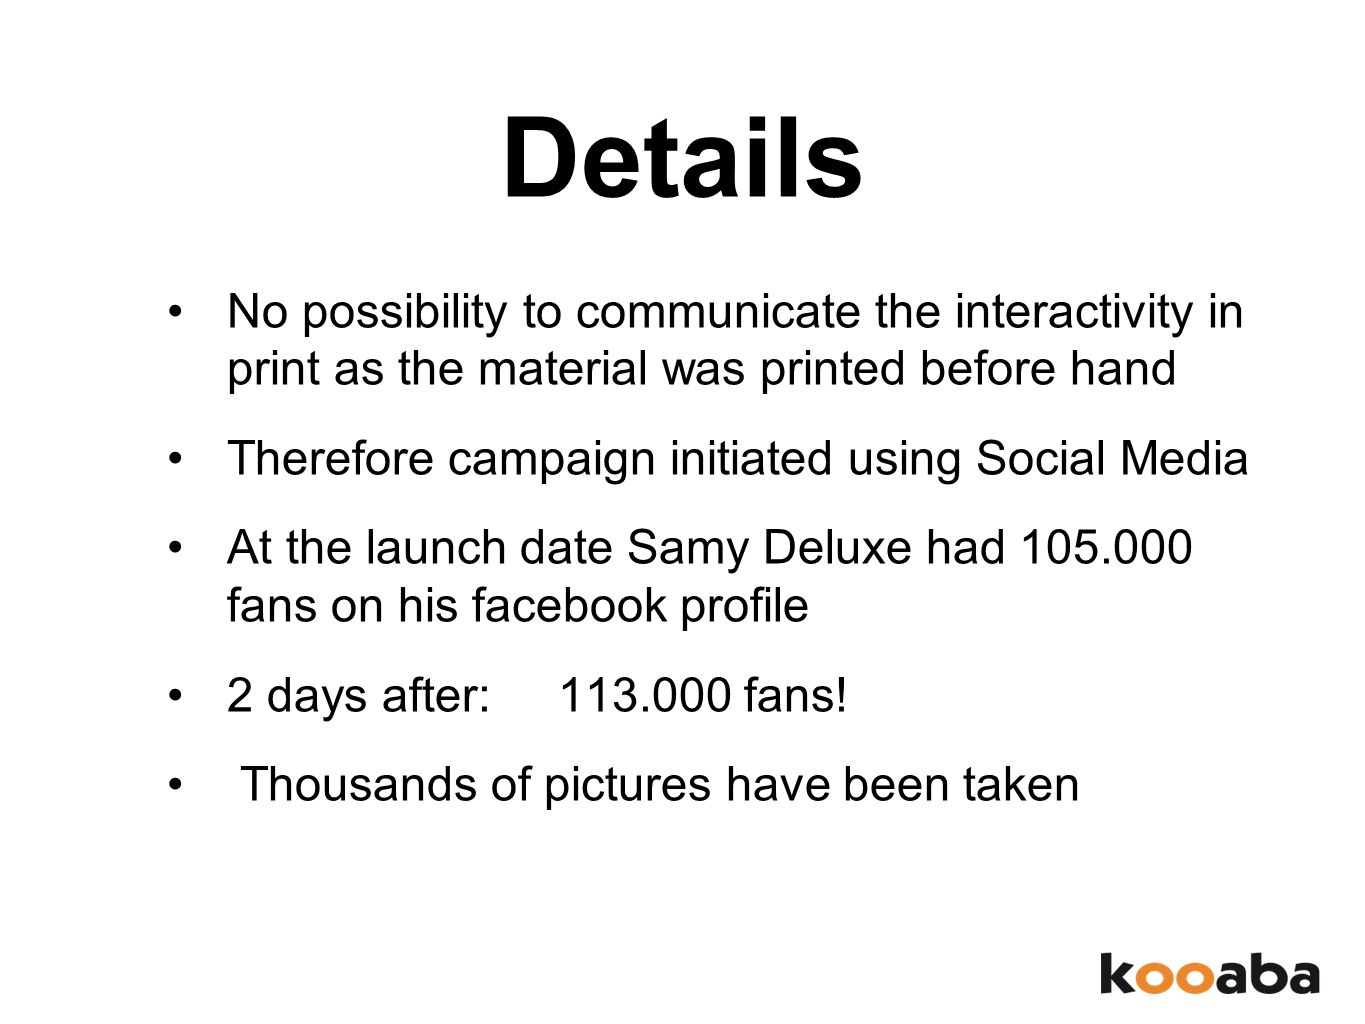 Details No possibility to communicate the interactivity in print as the material was printed before hand Therefore campaign initiated using Social Media At the launch date Samy Deluxe had fans on his facebook profile 2 days after: fans.